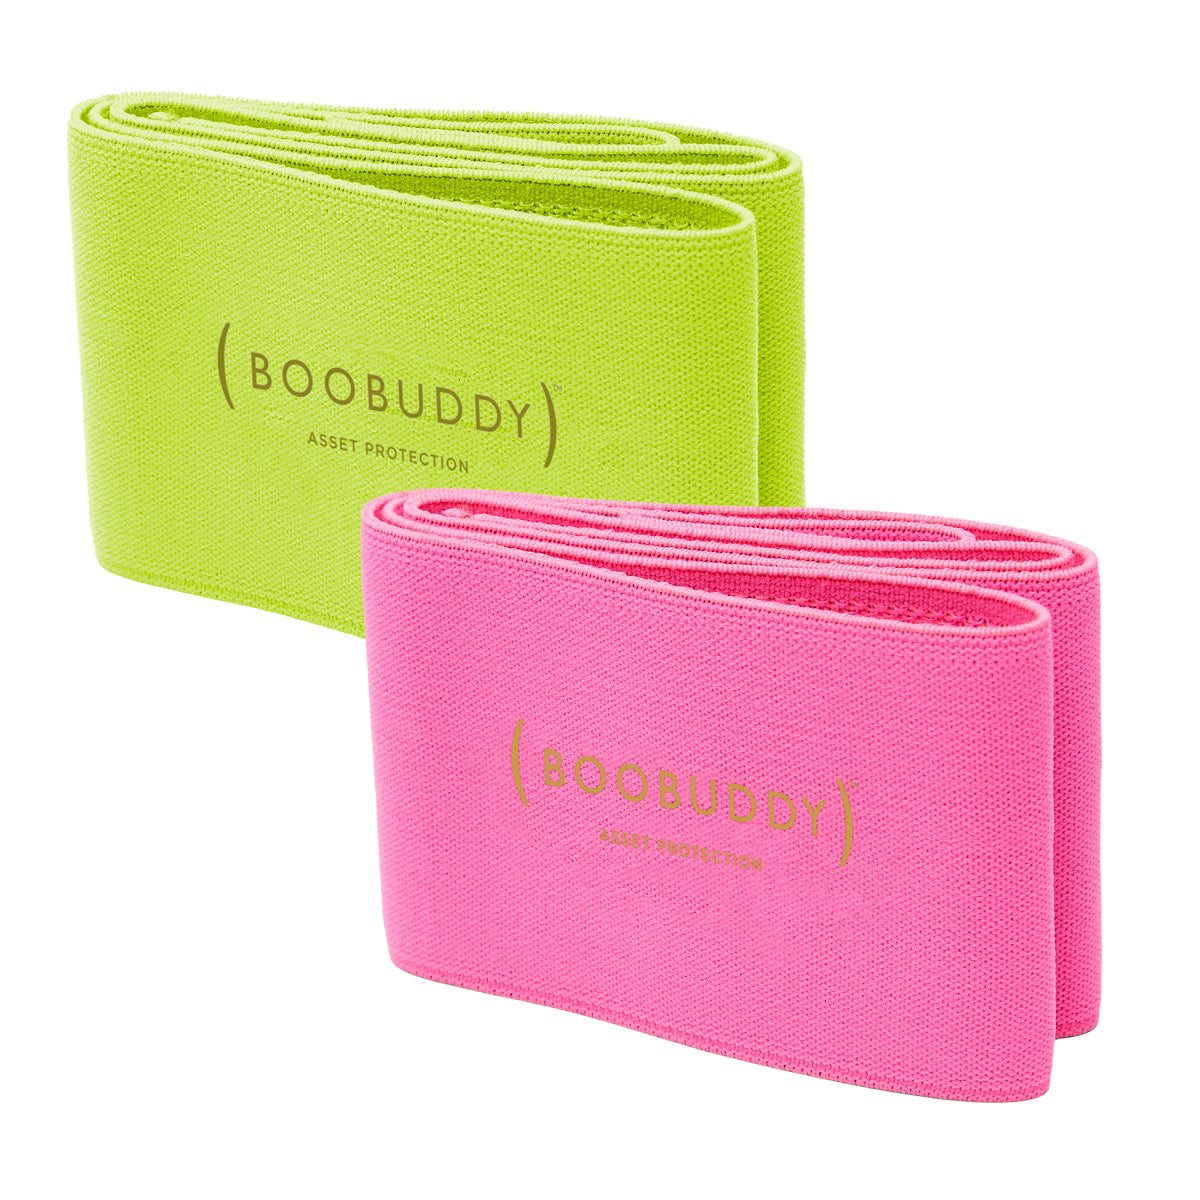 Boobuddy Adjustable Breast Support Band | Green & Pink Bundle | SAVE £13!